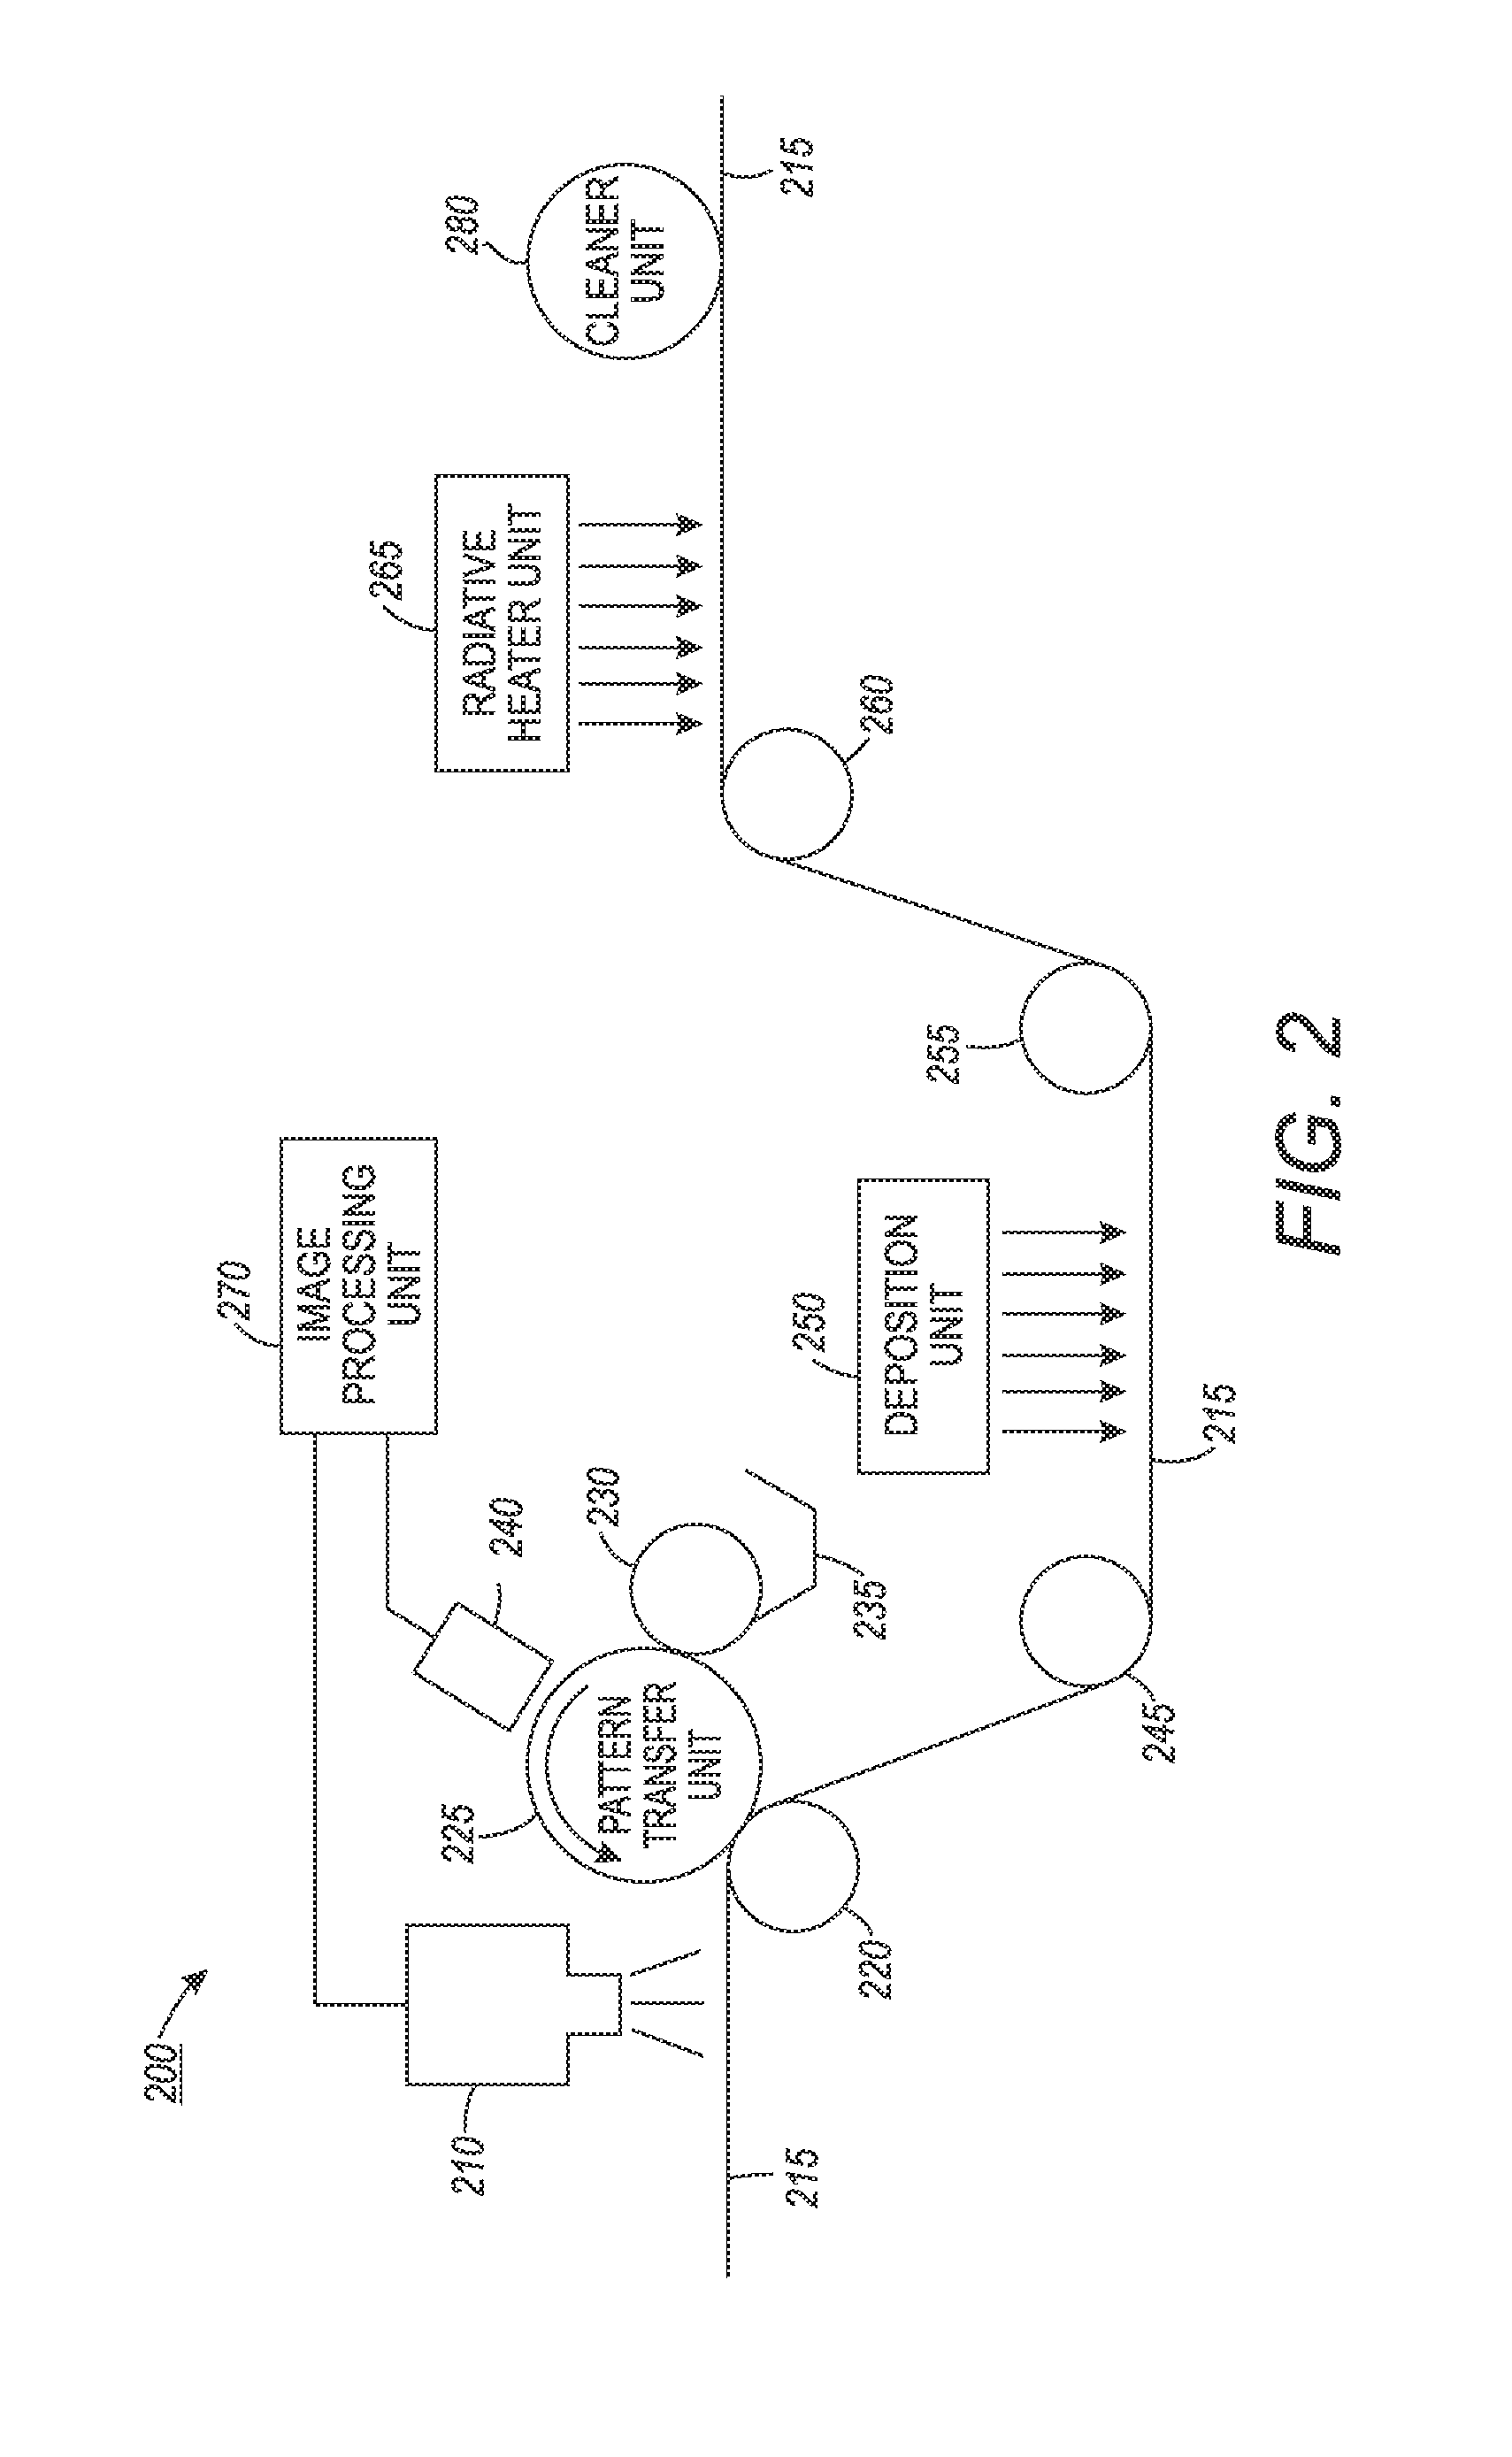 Systems and methods for implementing digital vapor phase patterning using variable data digital lithographic printing techniques